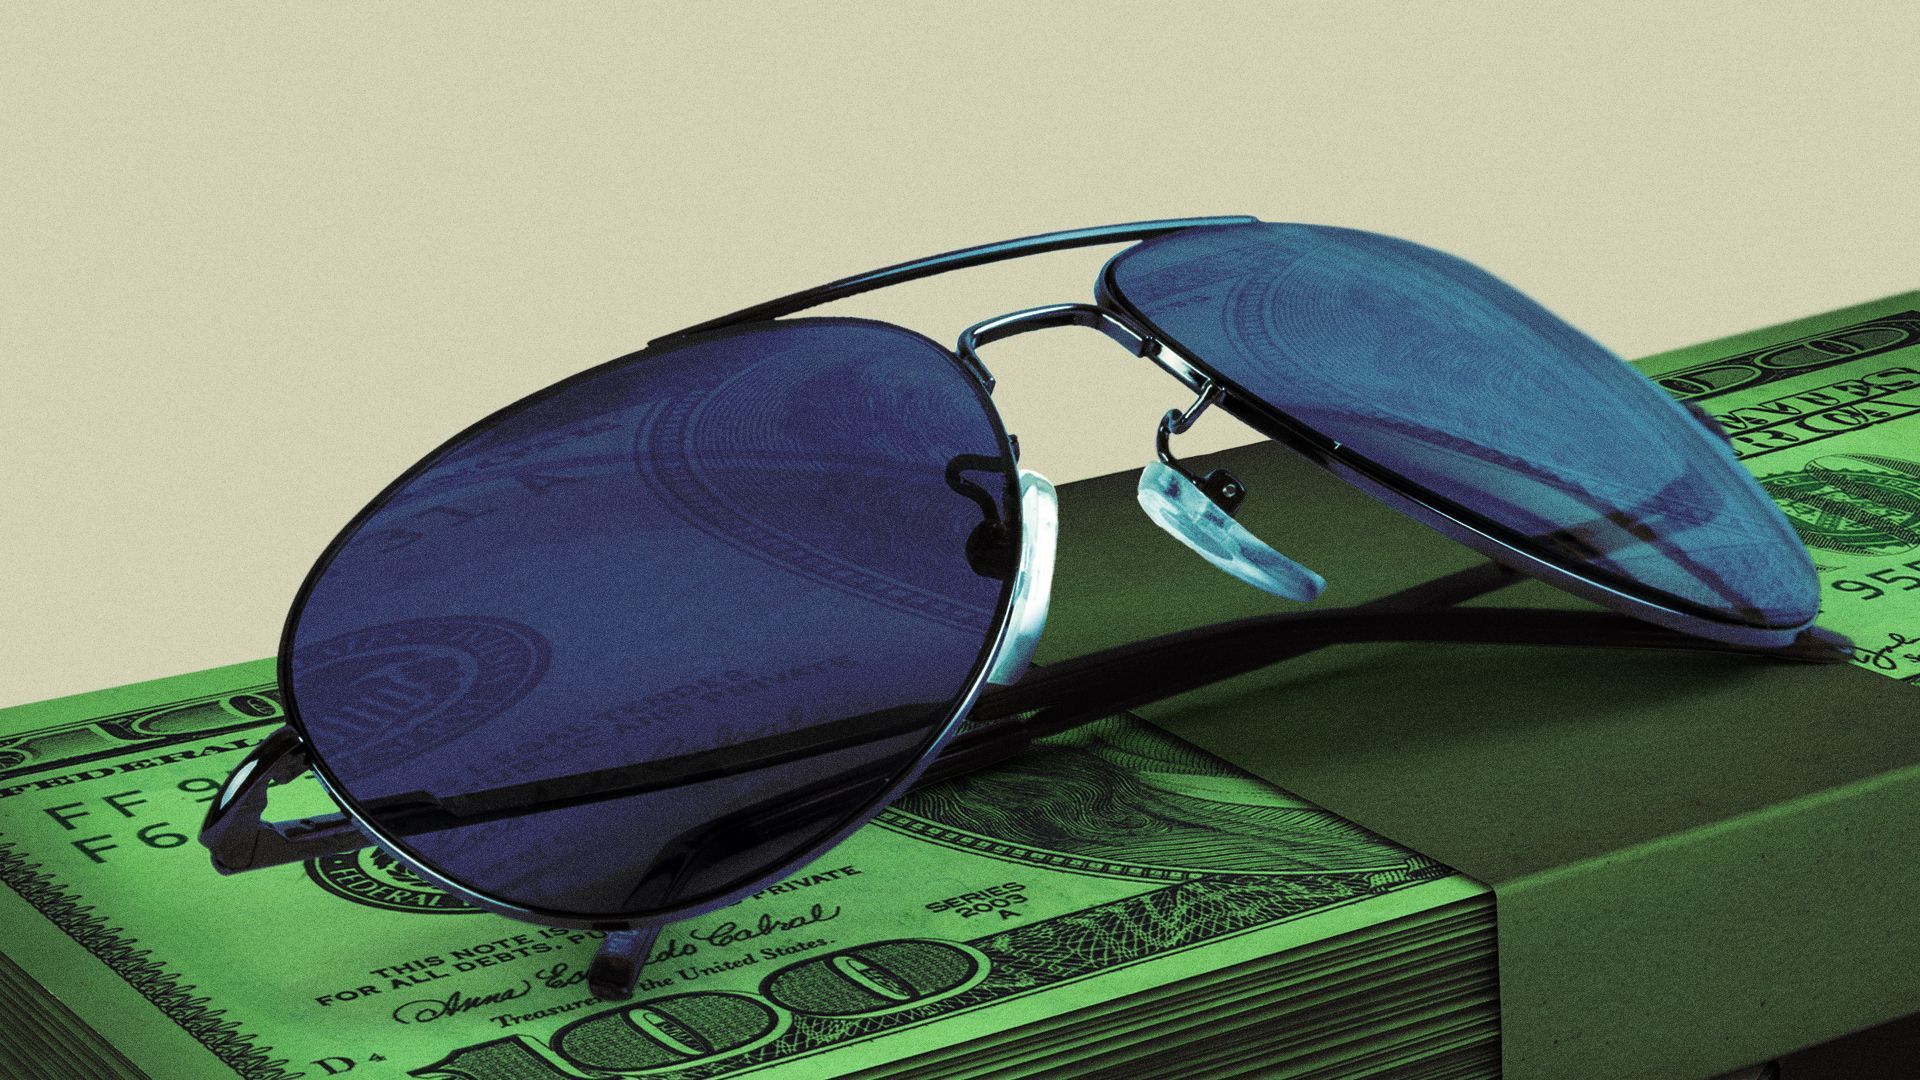 Illustration of a pair of aviator sunglasses resting on a stack of one-hundred dollar bills.